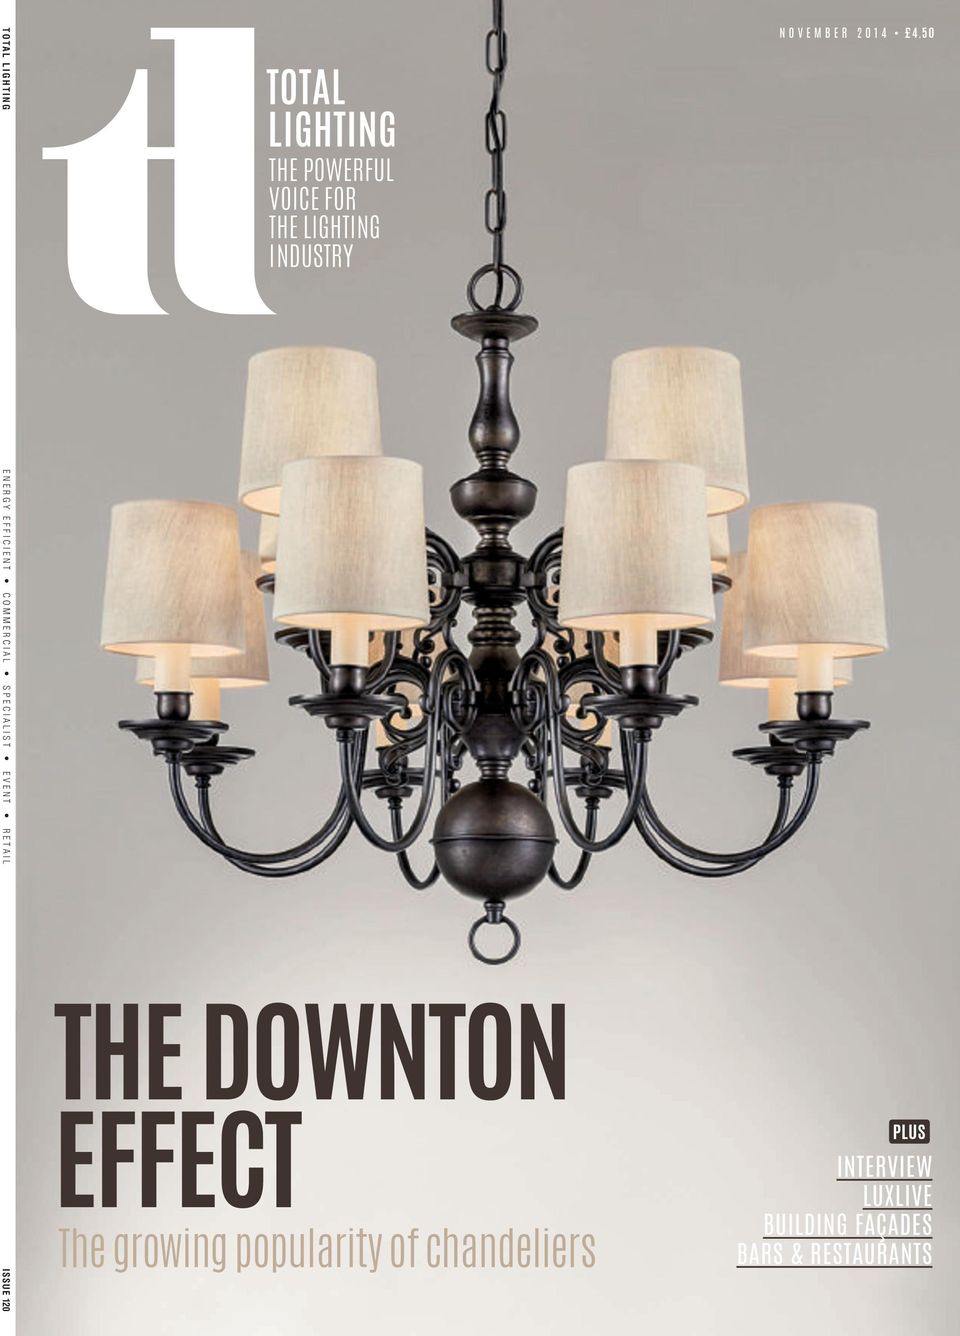 COMMERCIAL SPECIALIST EVENT RETAIL ISSUE 120 THE DOWNTON EFFECT